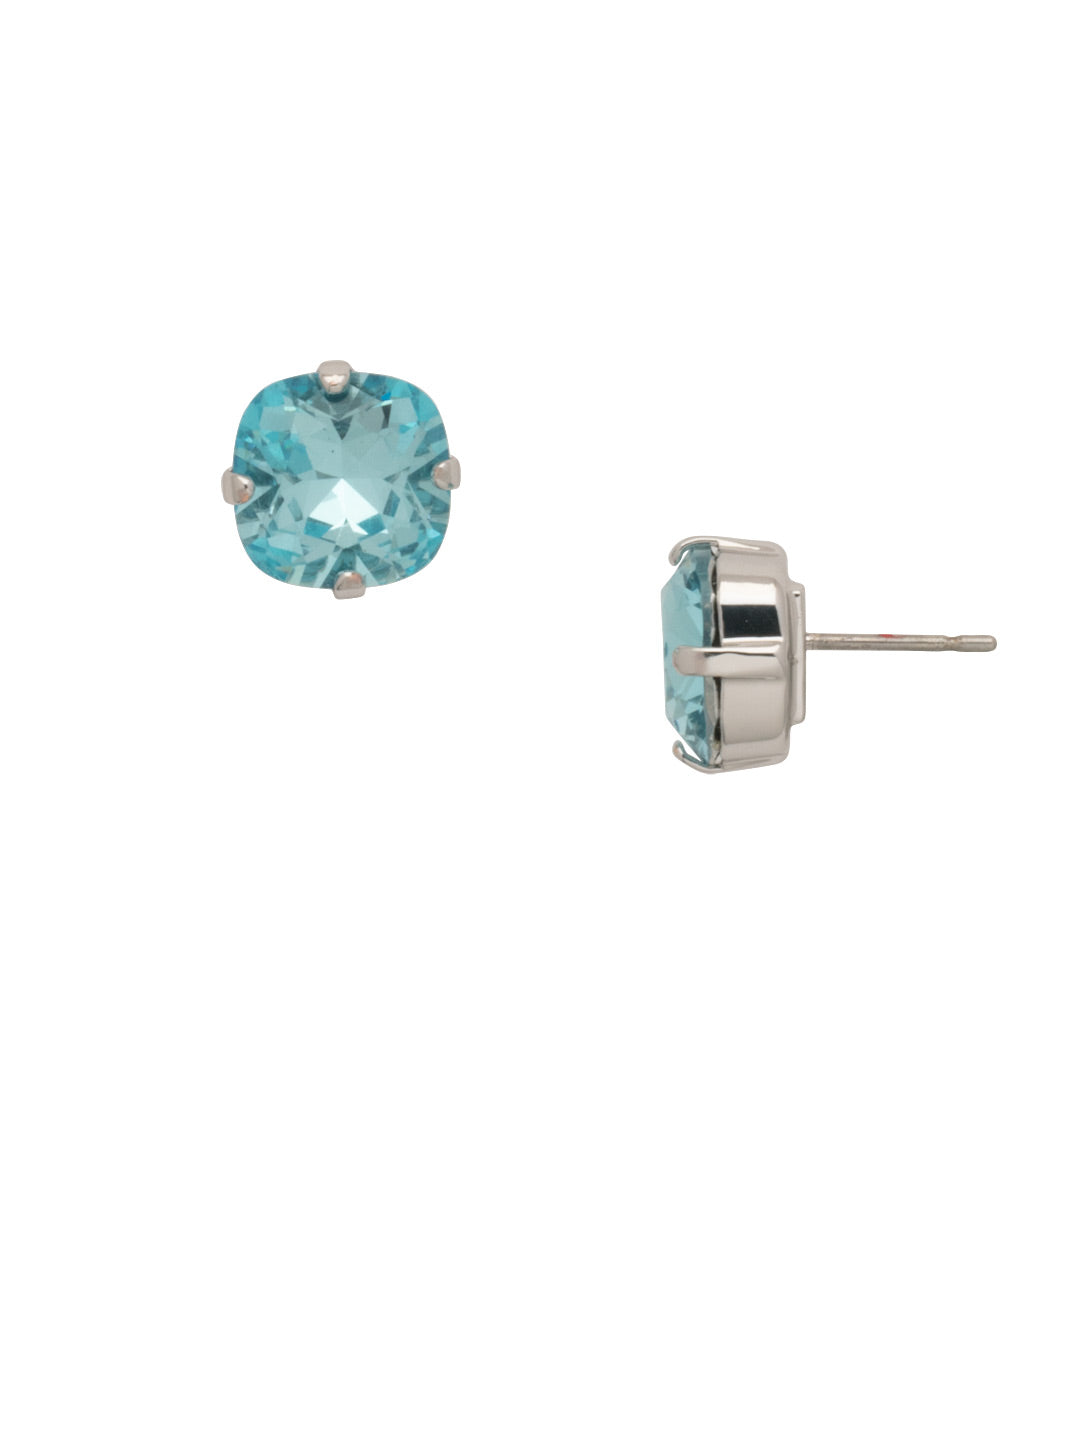 Halcyon Stud Earrings - EDH25PDAQU - <p>A beautiful, luminous cushion-cut crystal in a classic four-pronged setting that's ideal for everyday wear. From Sorrelli's Aquamarine collection in our Palladium finish.</p>